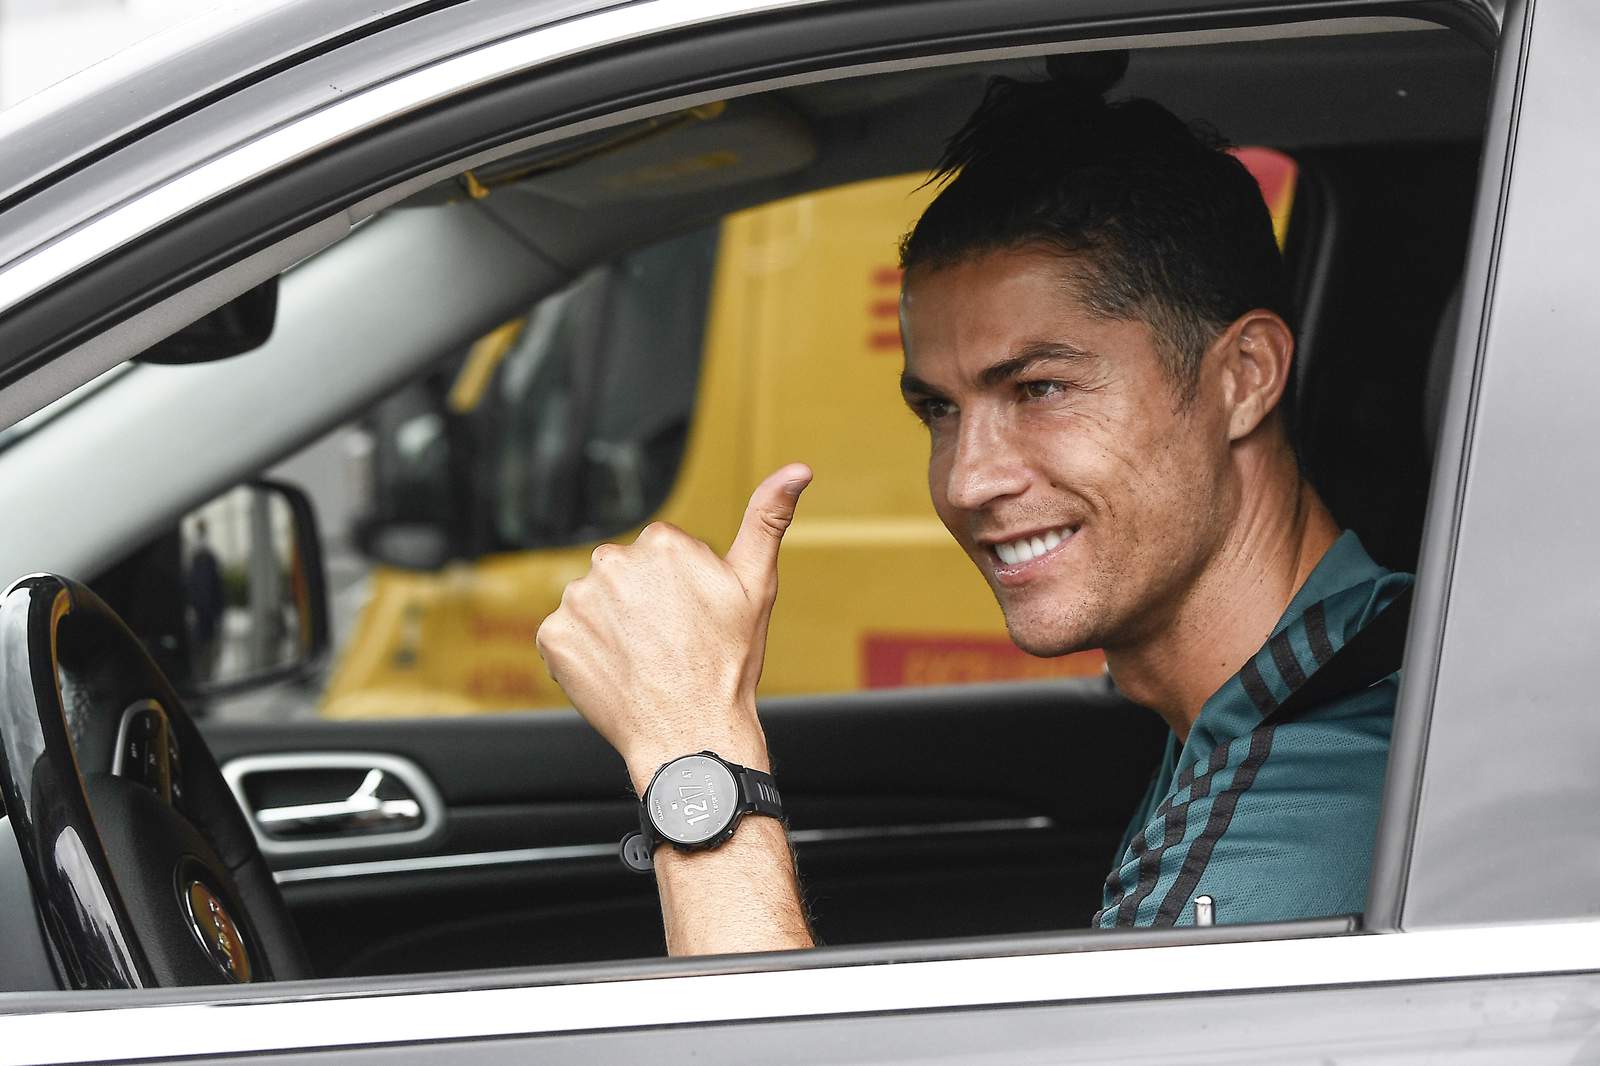 Cristiano Ronaldo reports to Juventus, gives thumbs up